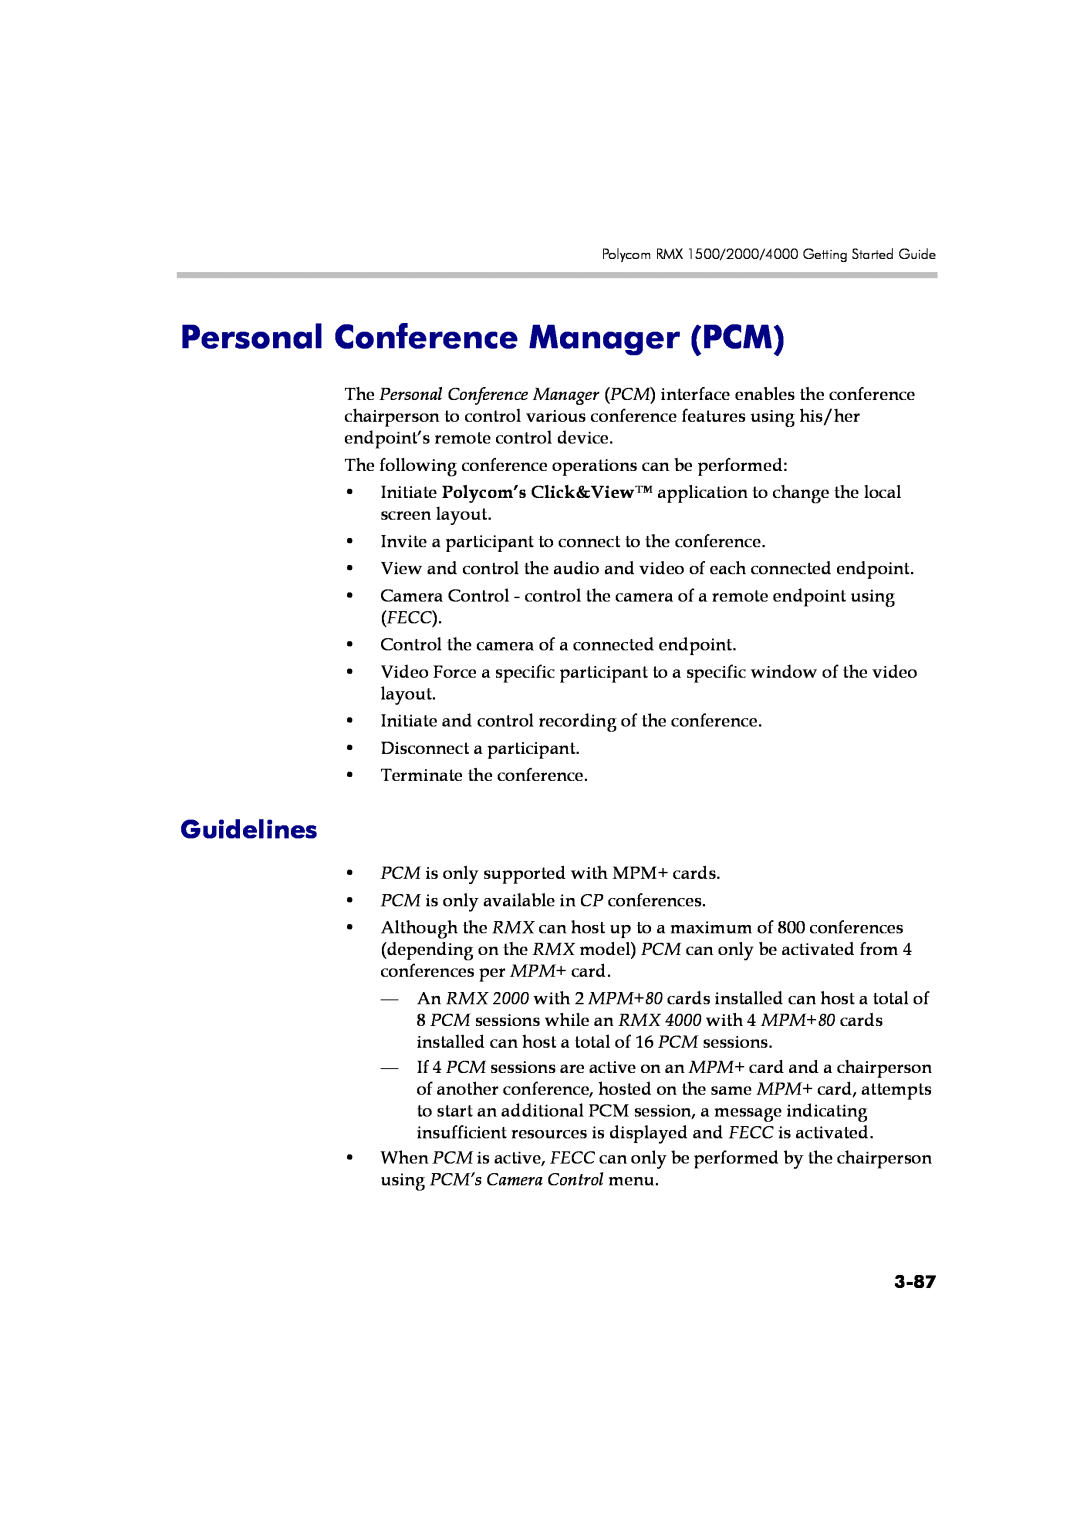 Polycom DOC2560B manual Personal Conference Manager PCM, Guidelines, 3-87 